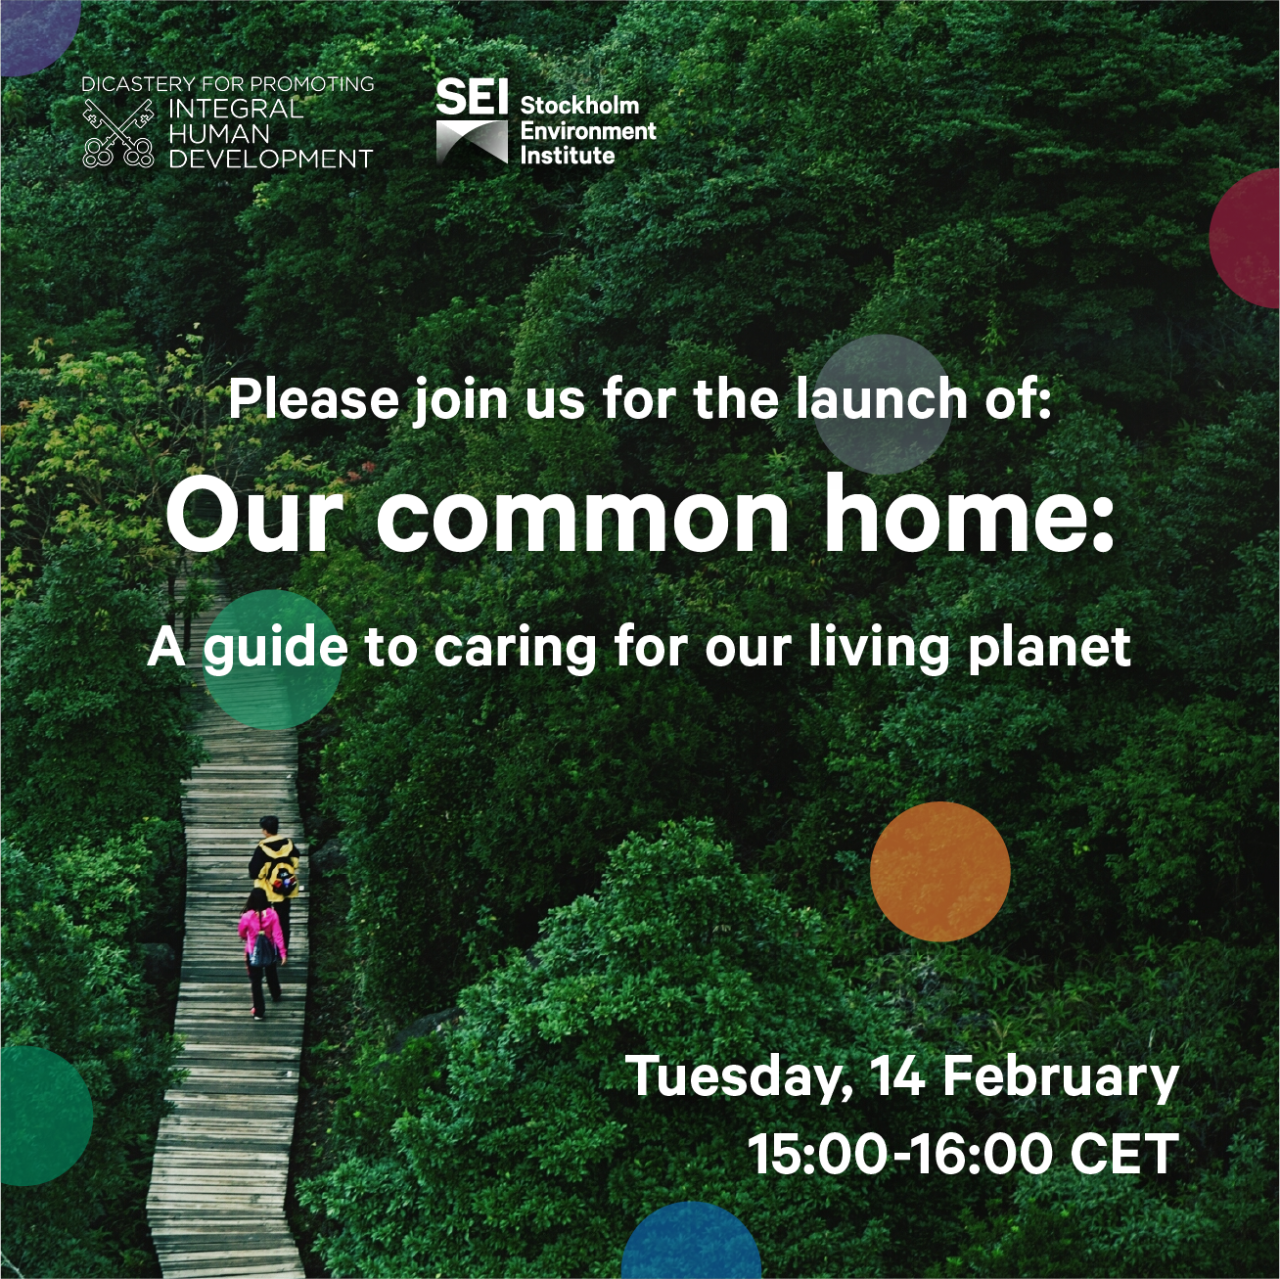 Our Common Home: A guide to caring for our living planet